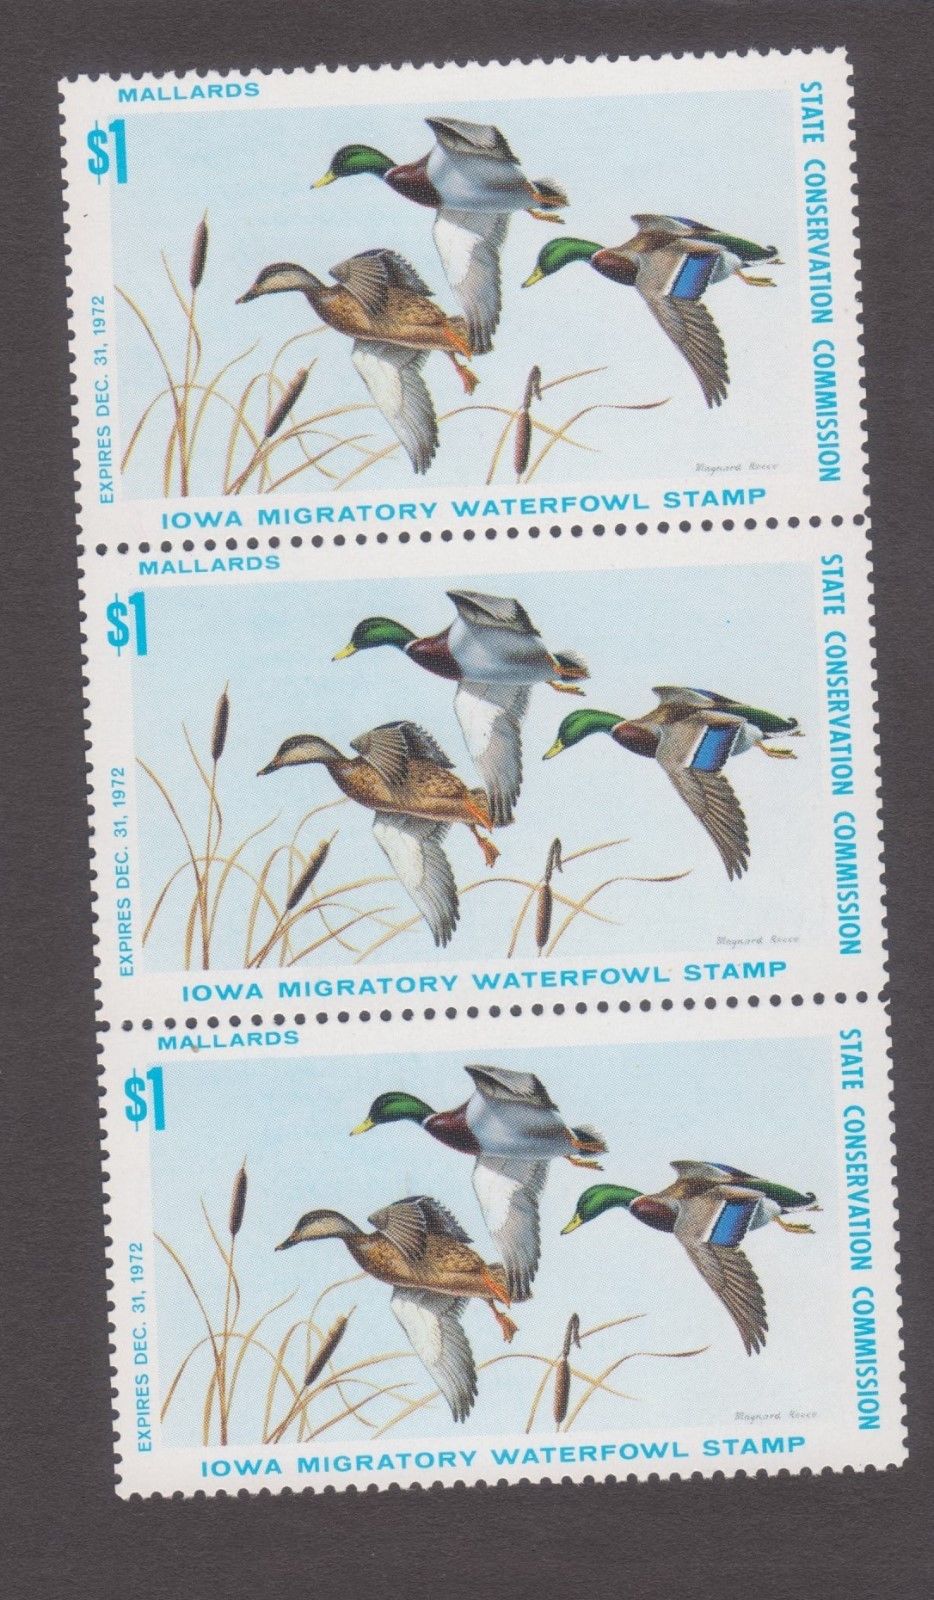 US Iowa State Duck Stamp 1972 1 in strip of 3 1 Mallards never hinged scarce